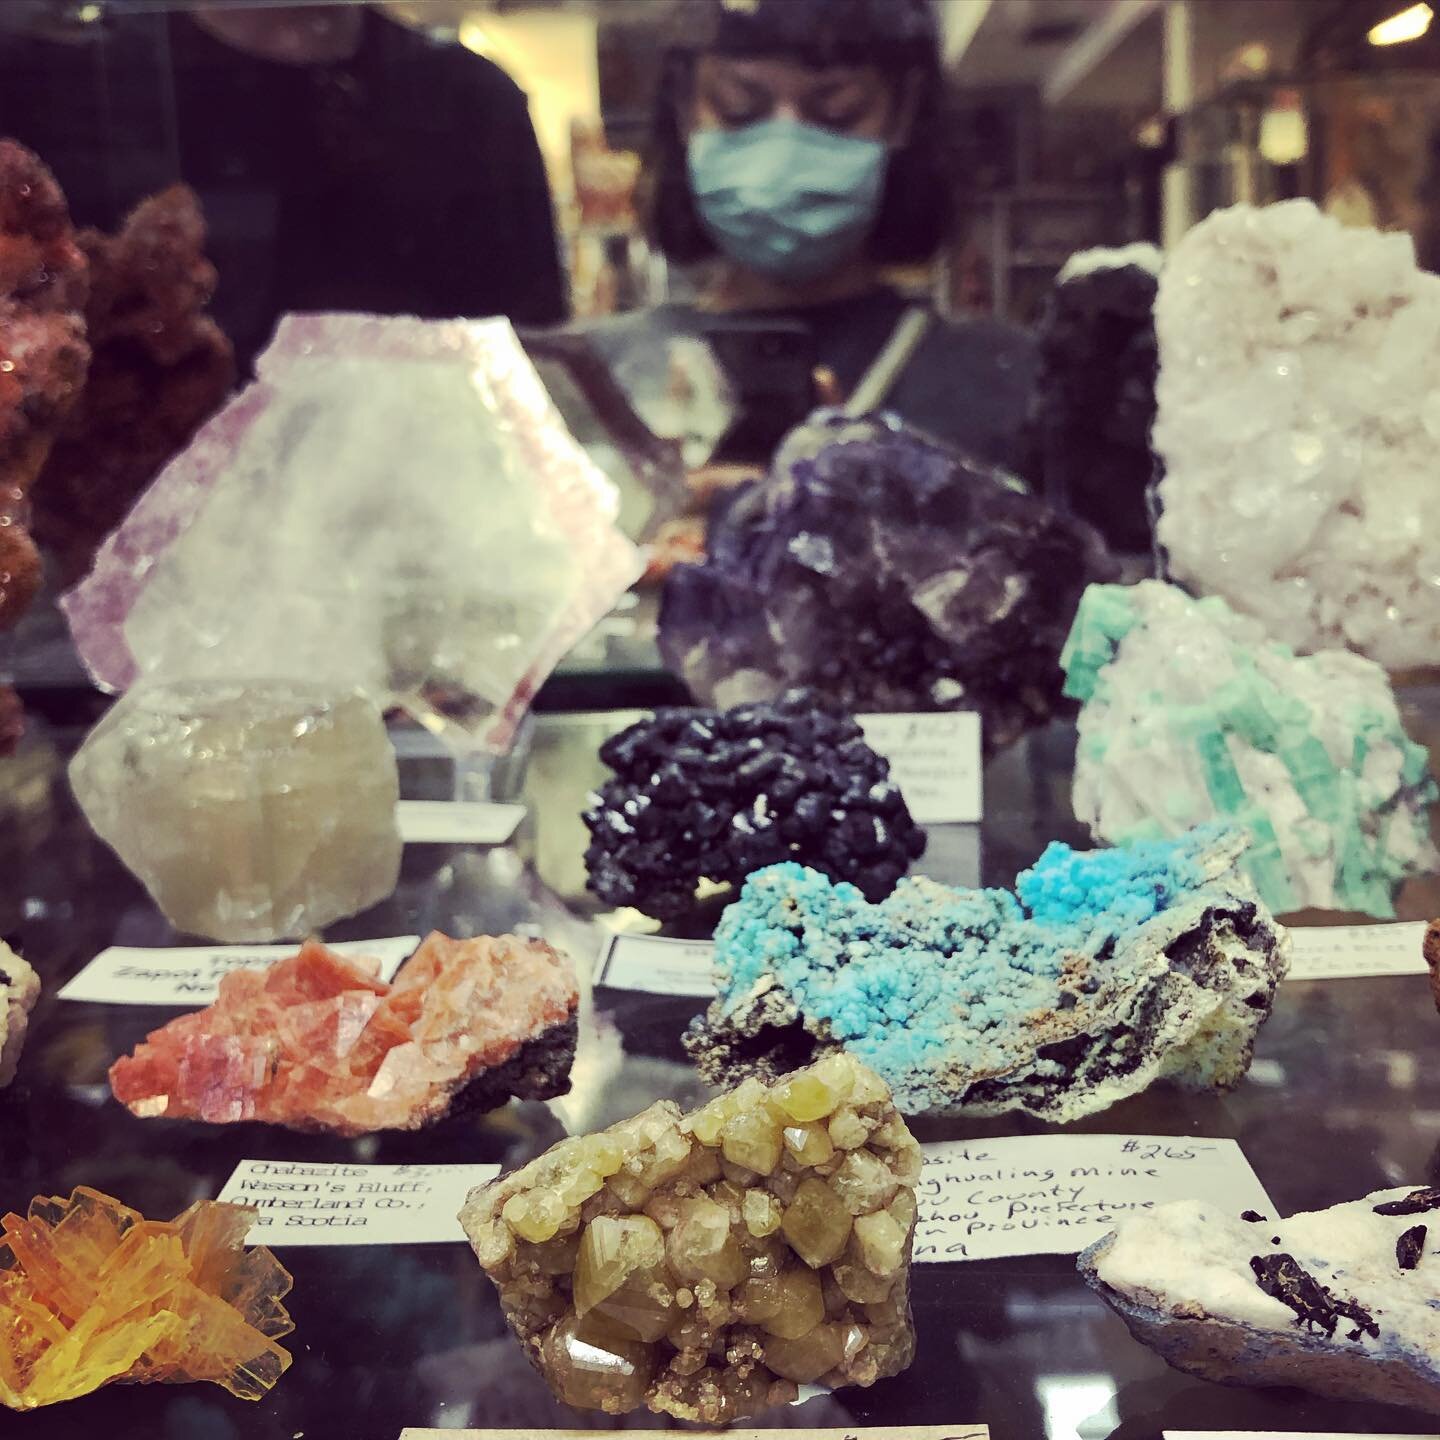 All of the crystals in one magical location. #crystals #magical #minerals #gemstones #washingtonstate